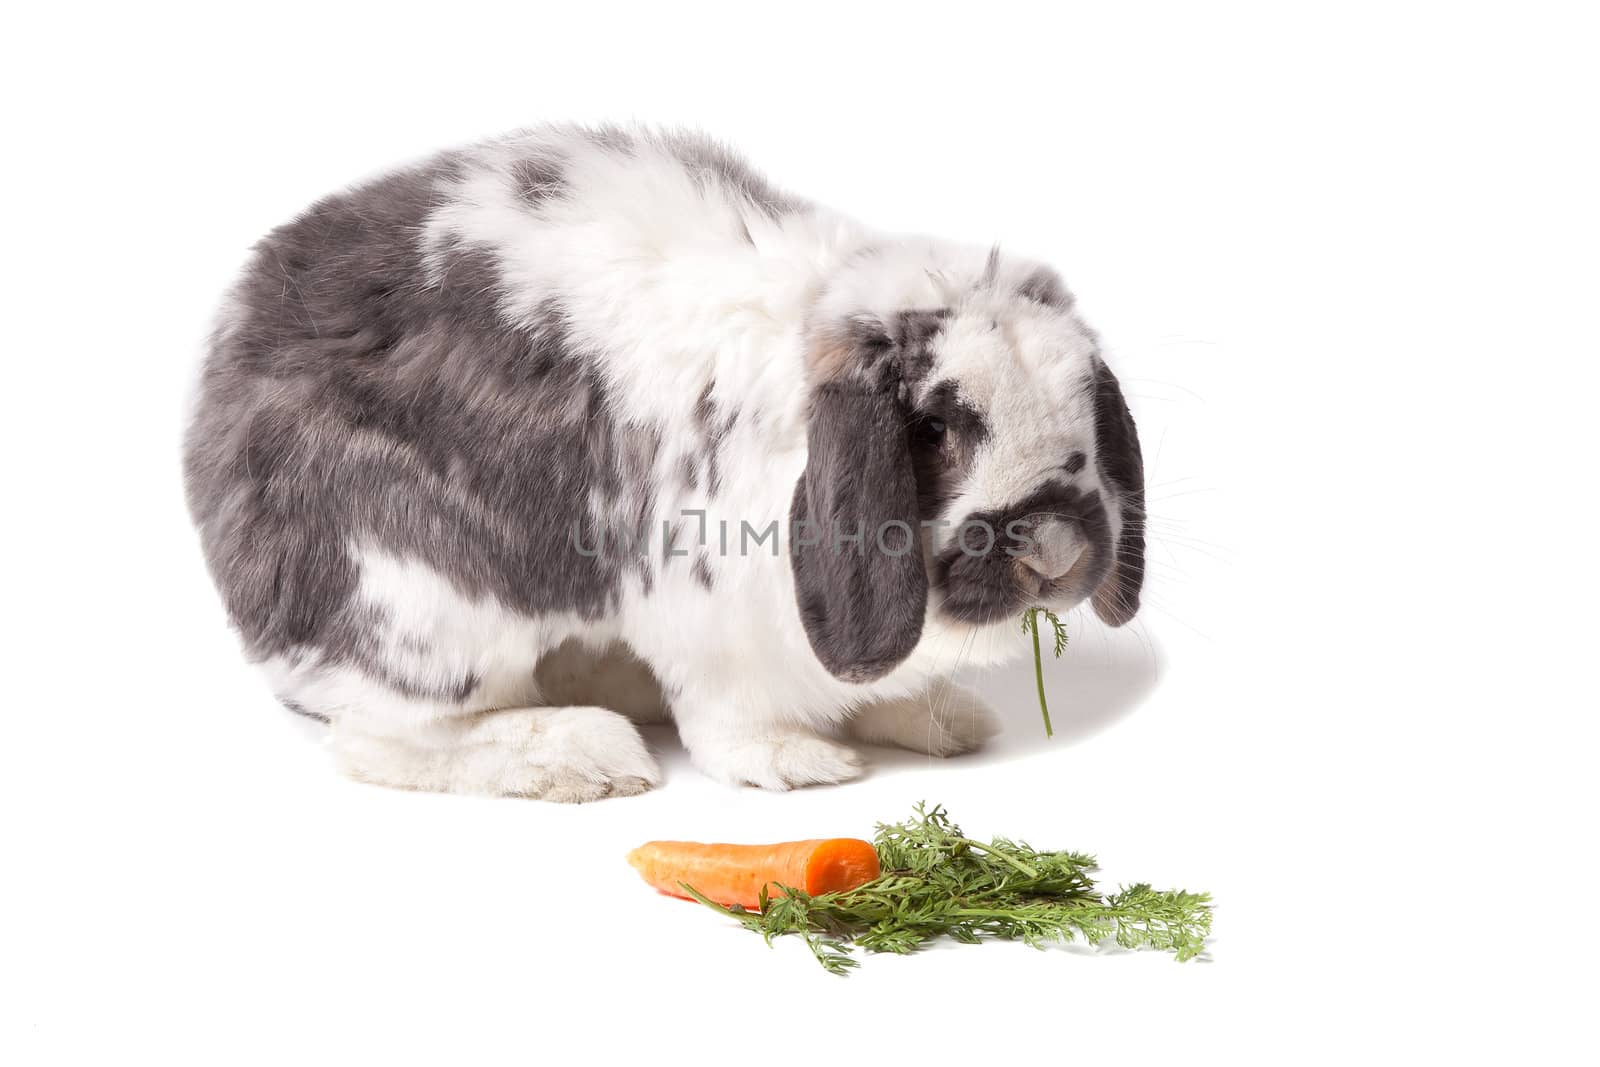 Cute Grey and White Bunny Rabbit Facing Right Eating Carrot On White by scheriton